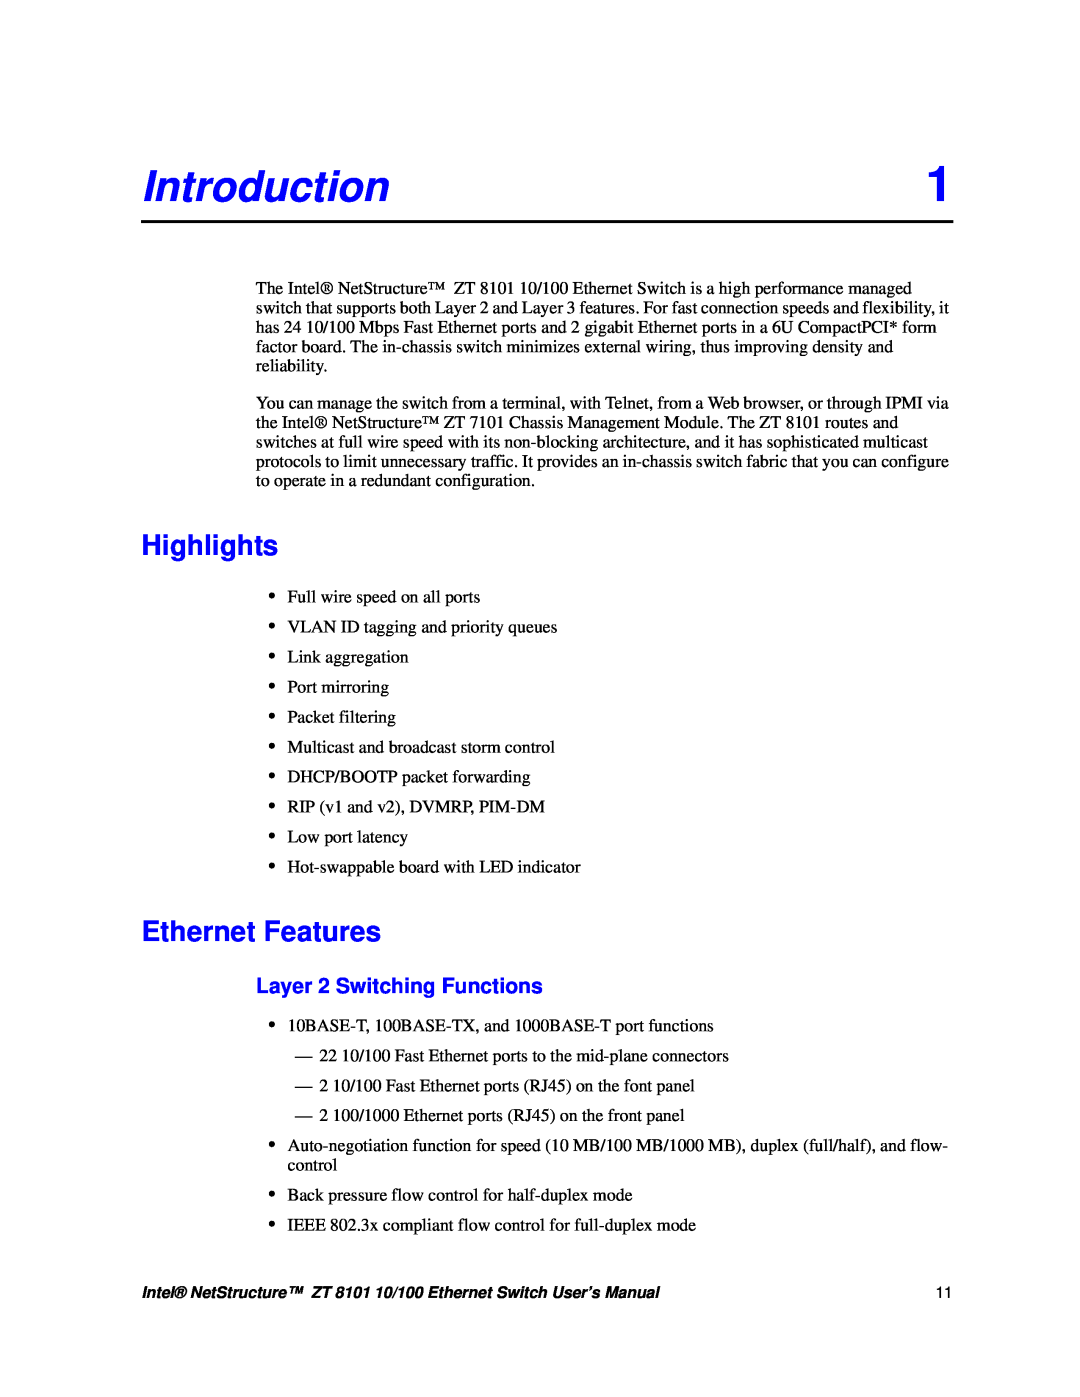 Intel ZT 8101 10/100 user manual Introduction, Highlights, Ethernet Features, Layer 2 Switching Functions 